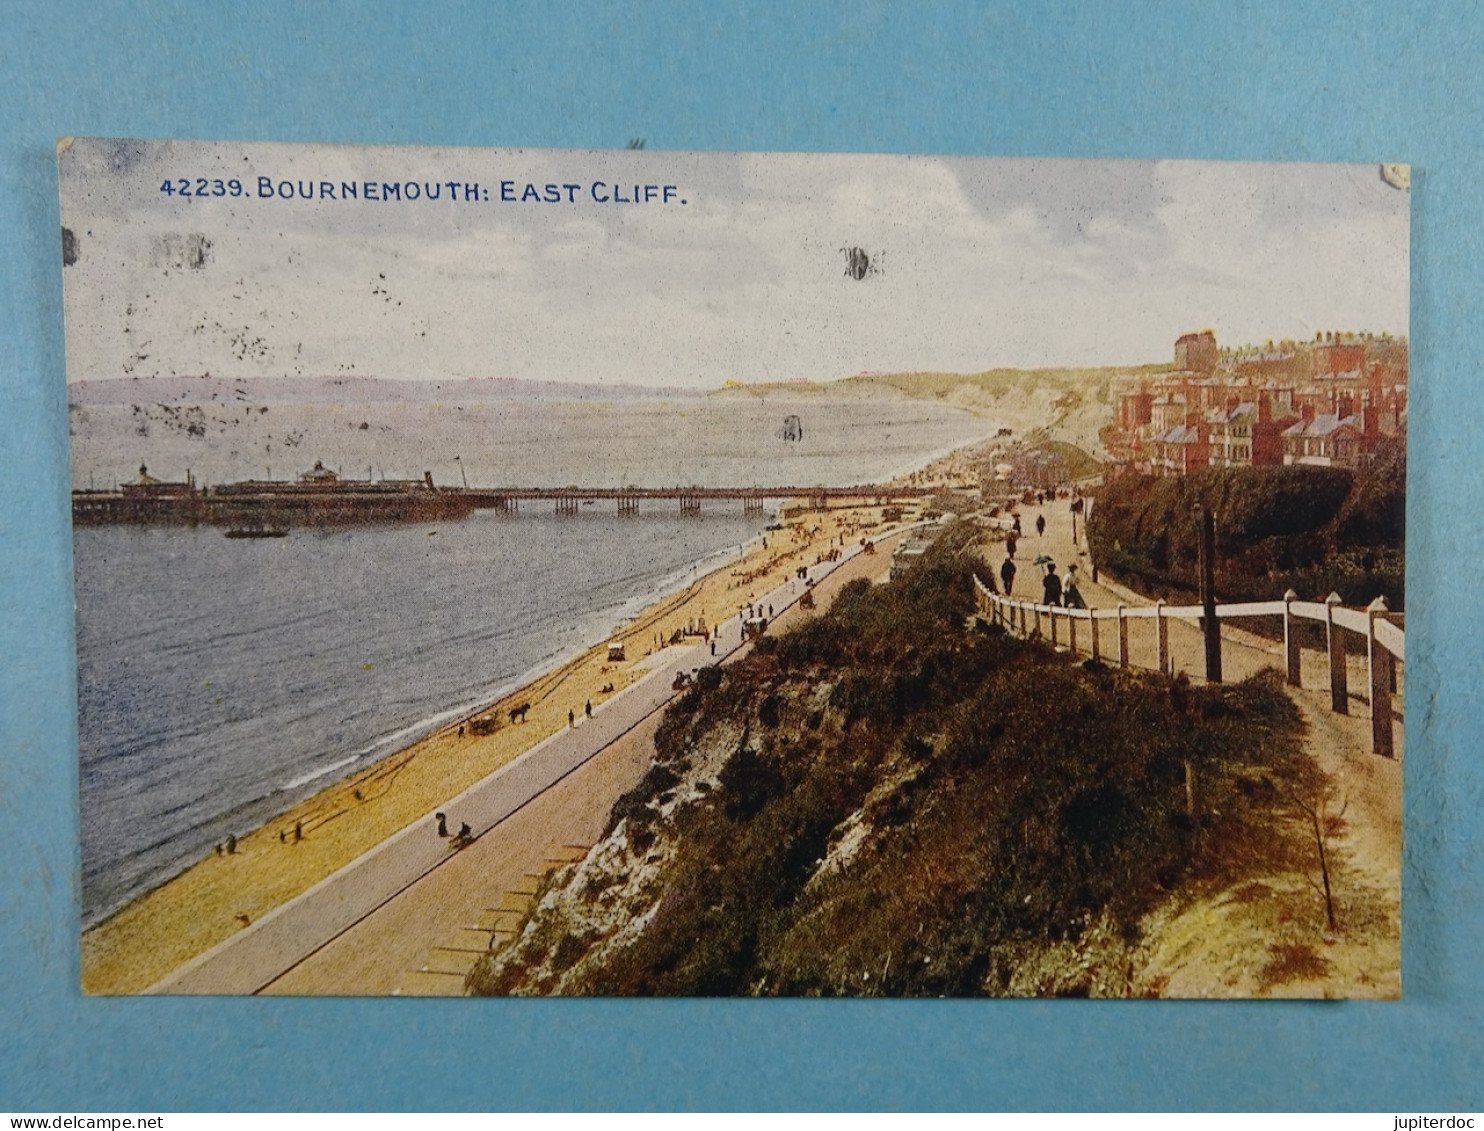 Bournemouth East Cliff - Bournemouth (from 1972)